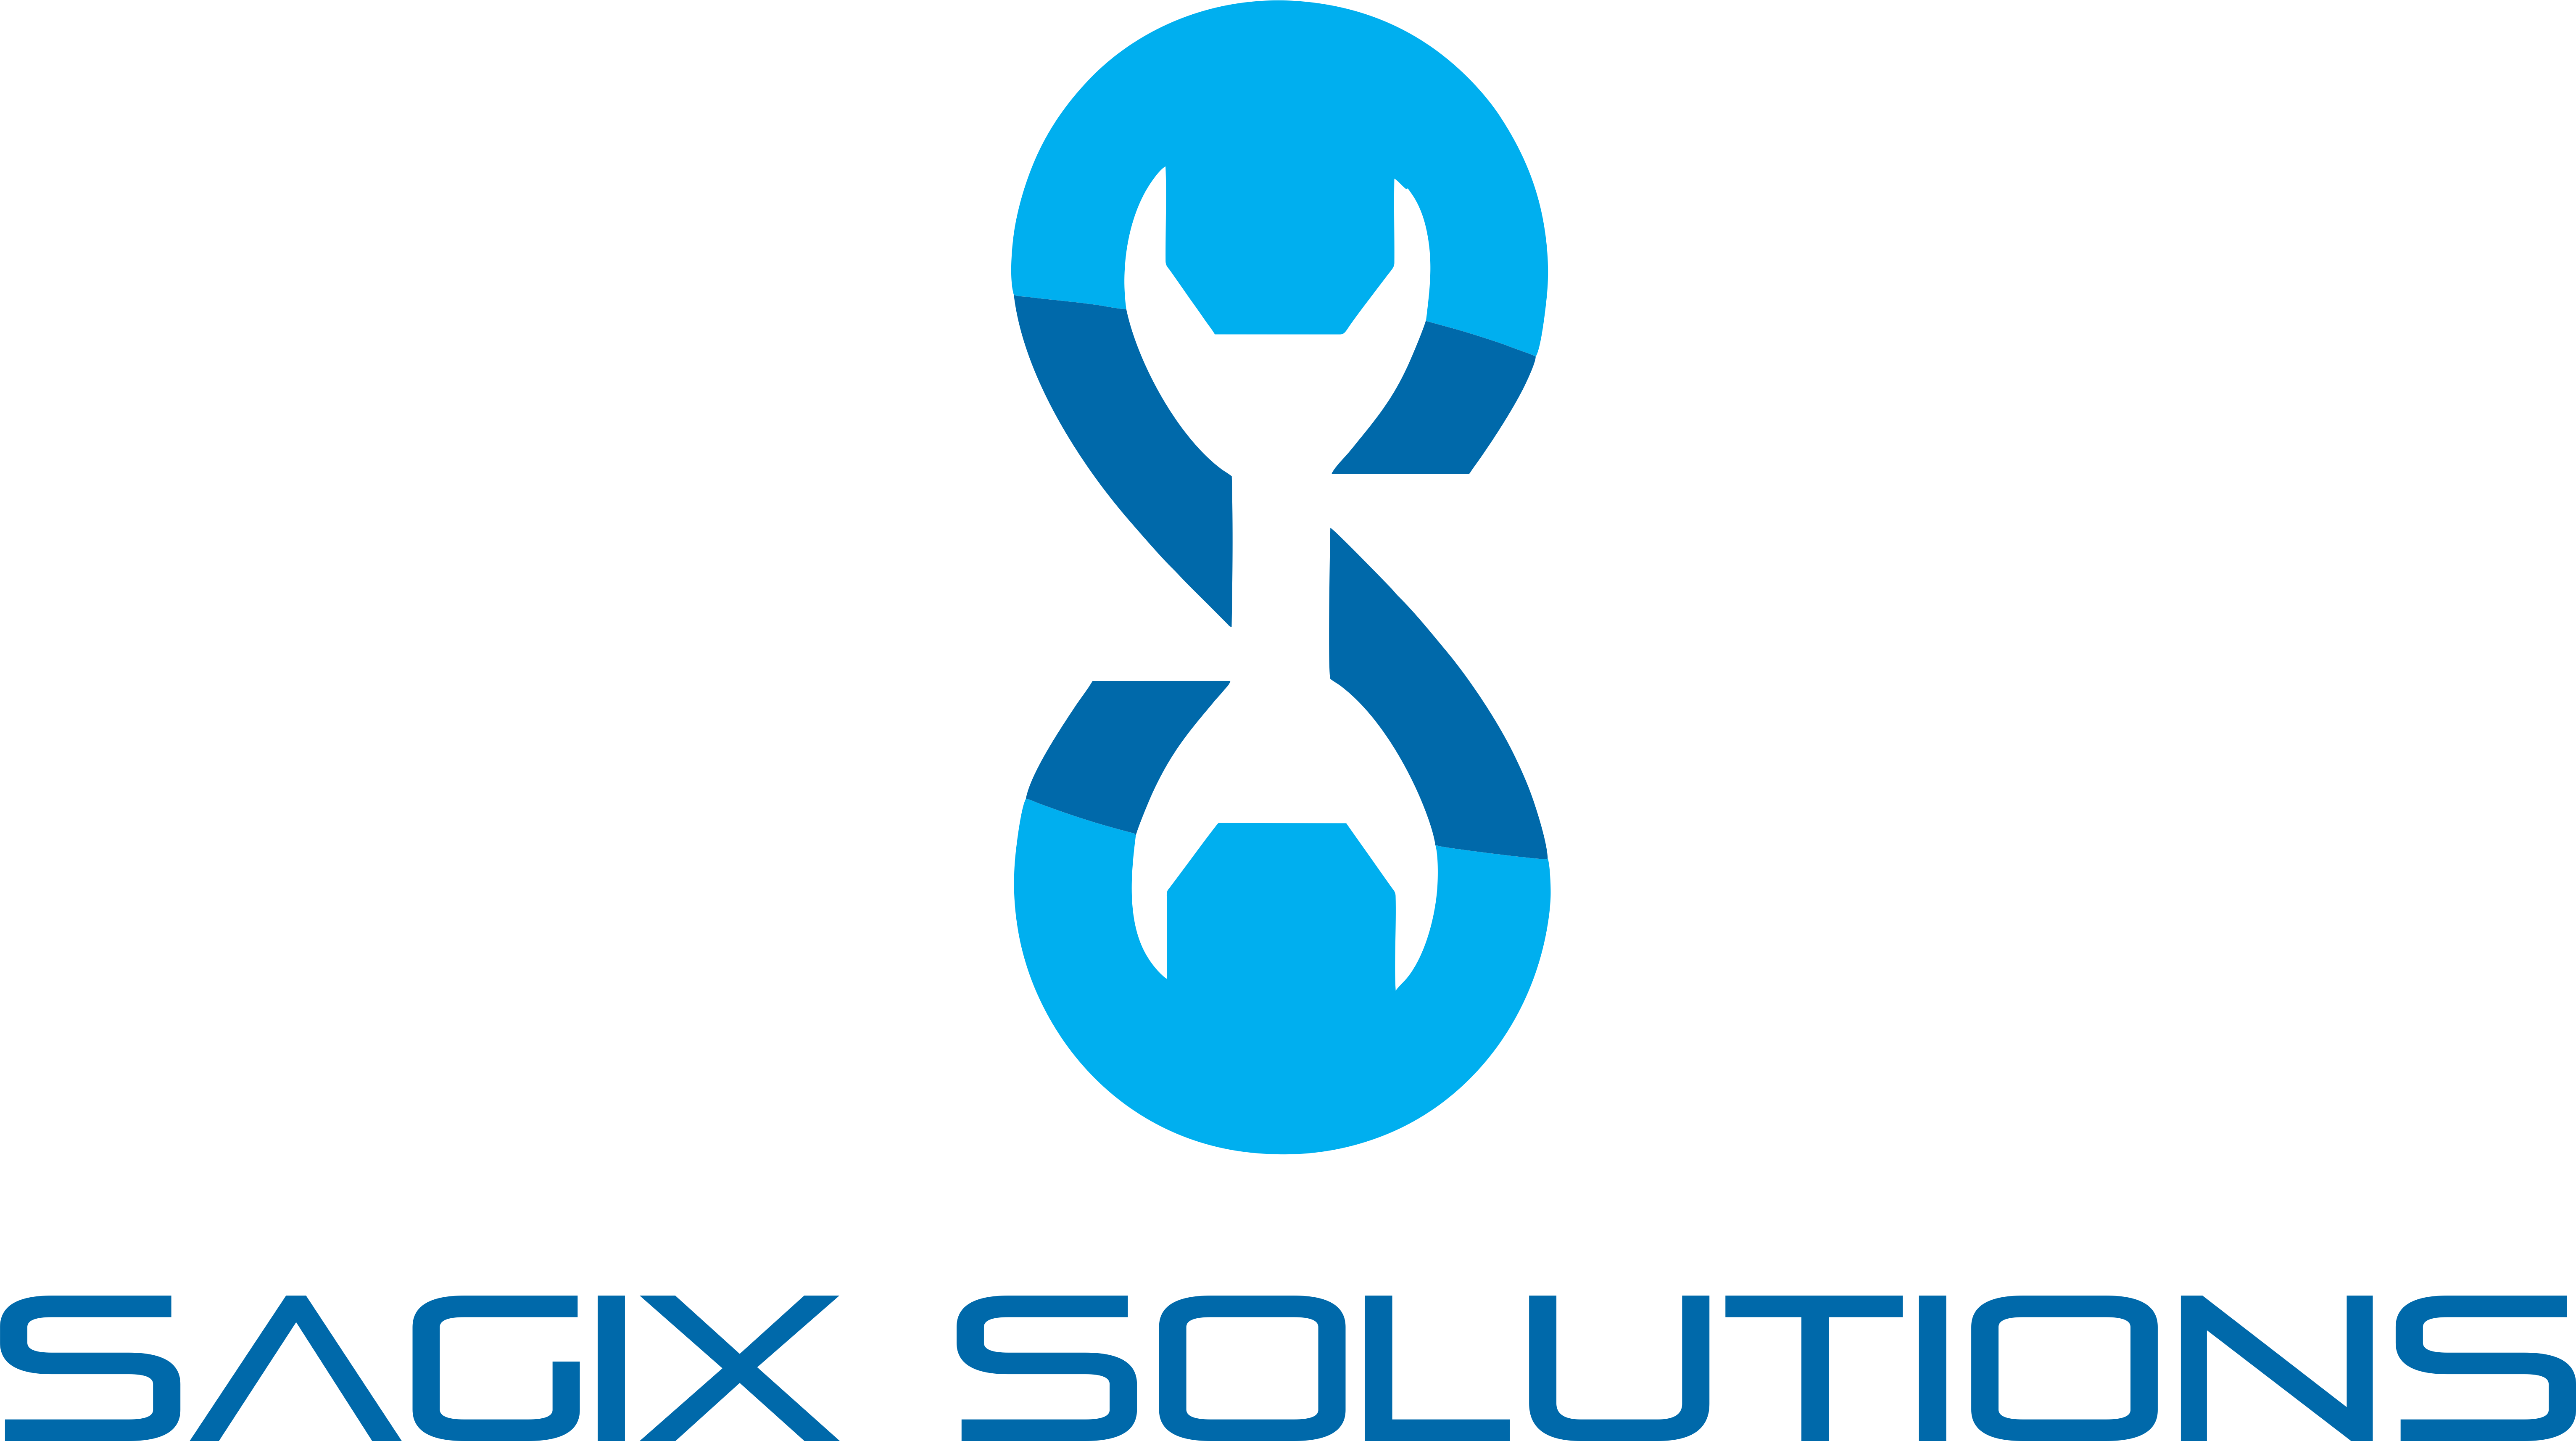 Sagix solutions make work easier whilst offering high performance in terms of product quality and service efficiency